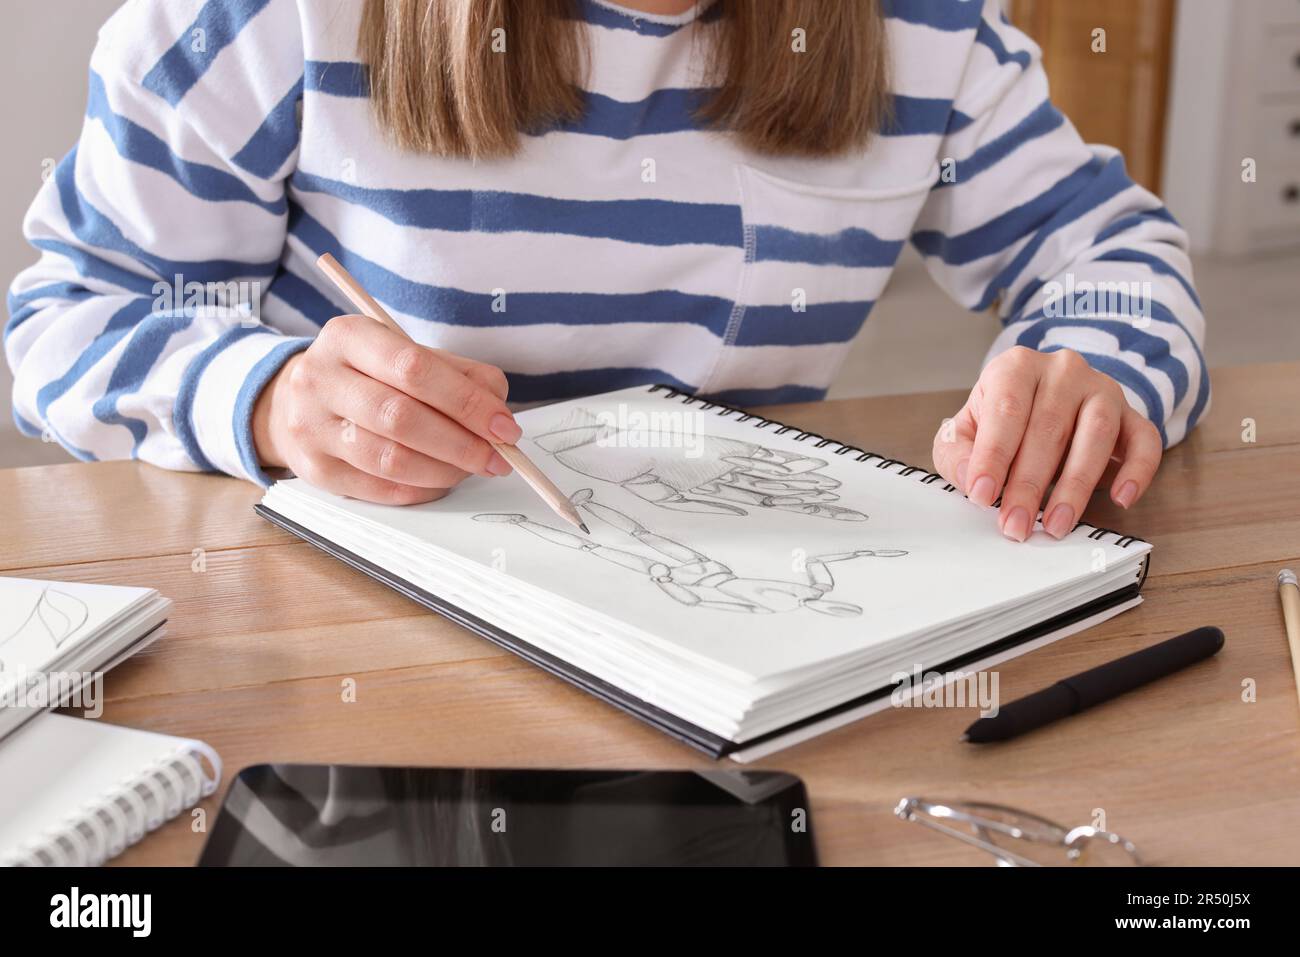 Woman Drawing in Sketchbook with Pencil at Wooden Table, Top View Stock  Image - Image of draw, leisure: 243607331